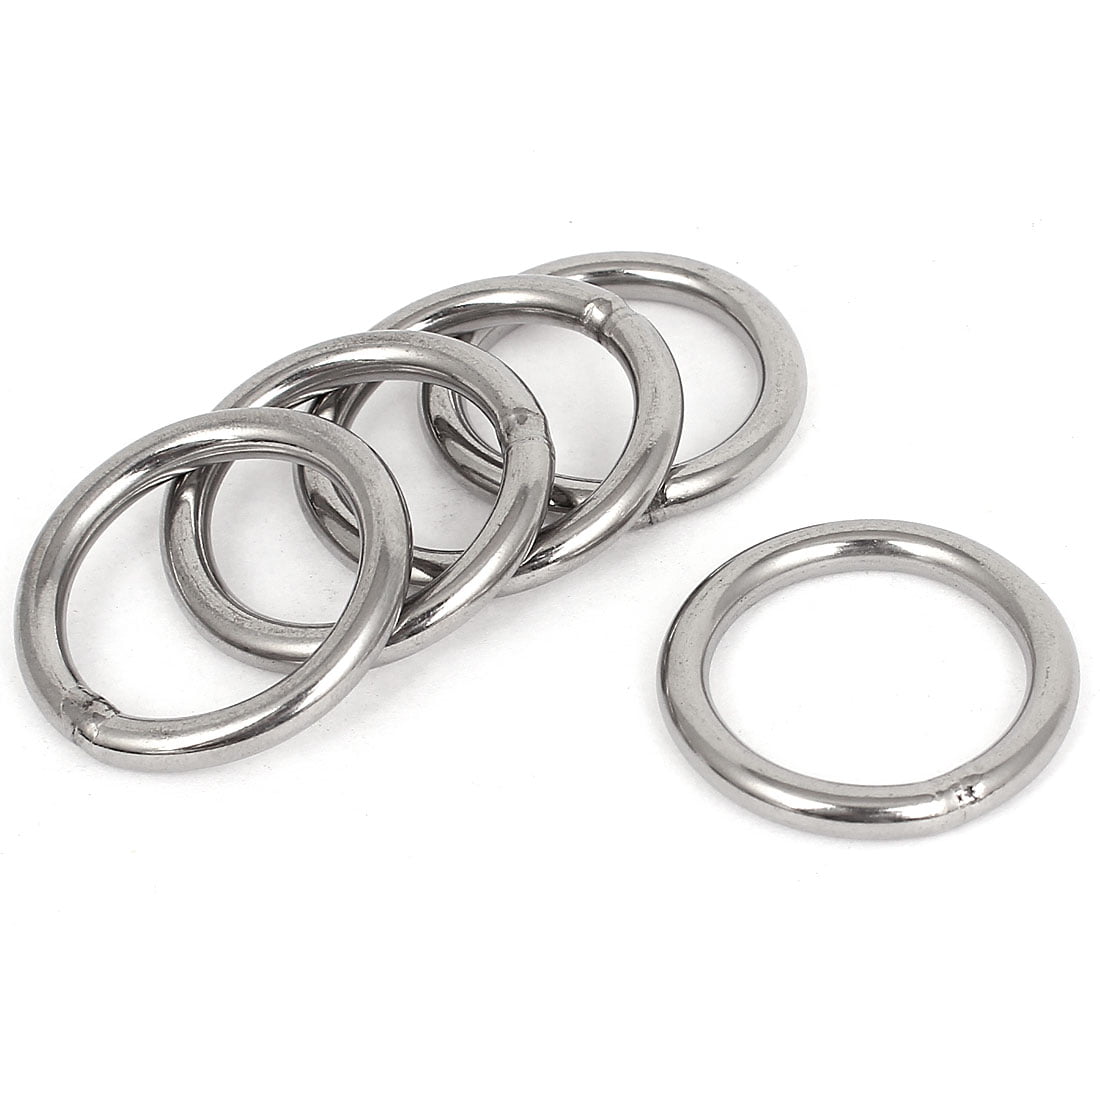 201 Stainless Steel Welded O Ring Silver Tone 40mm x M3 4pcs 